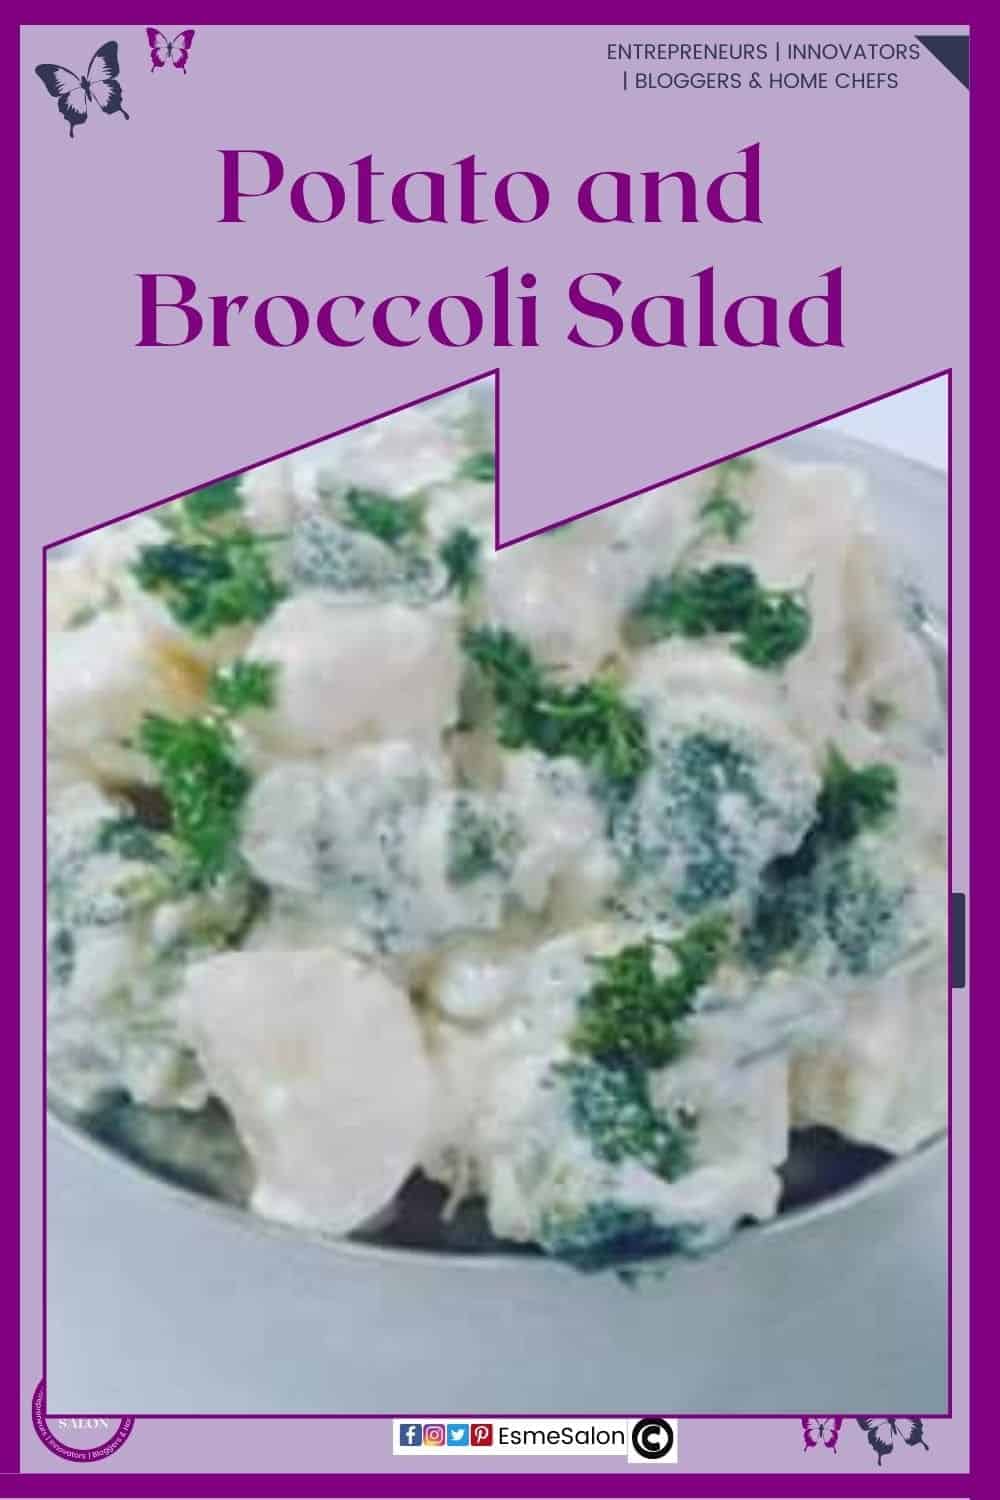 an image of a white bowl filled with creamy Potato and Broccoli Salad and topped with fresh parsley